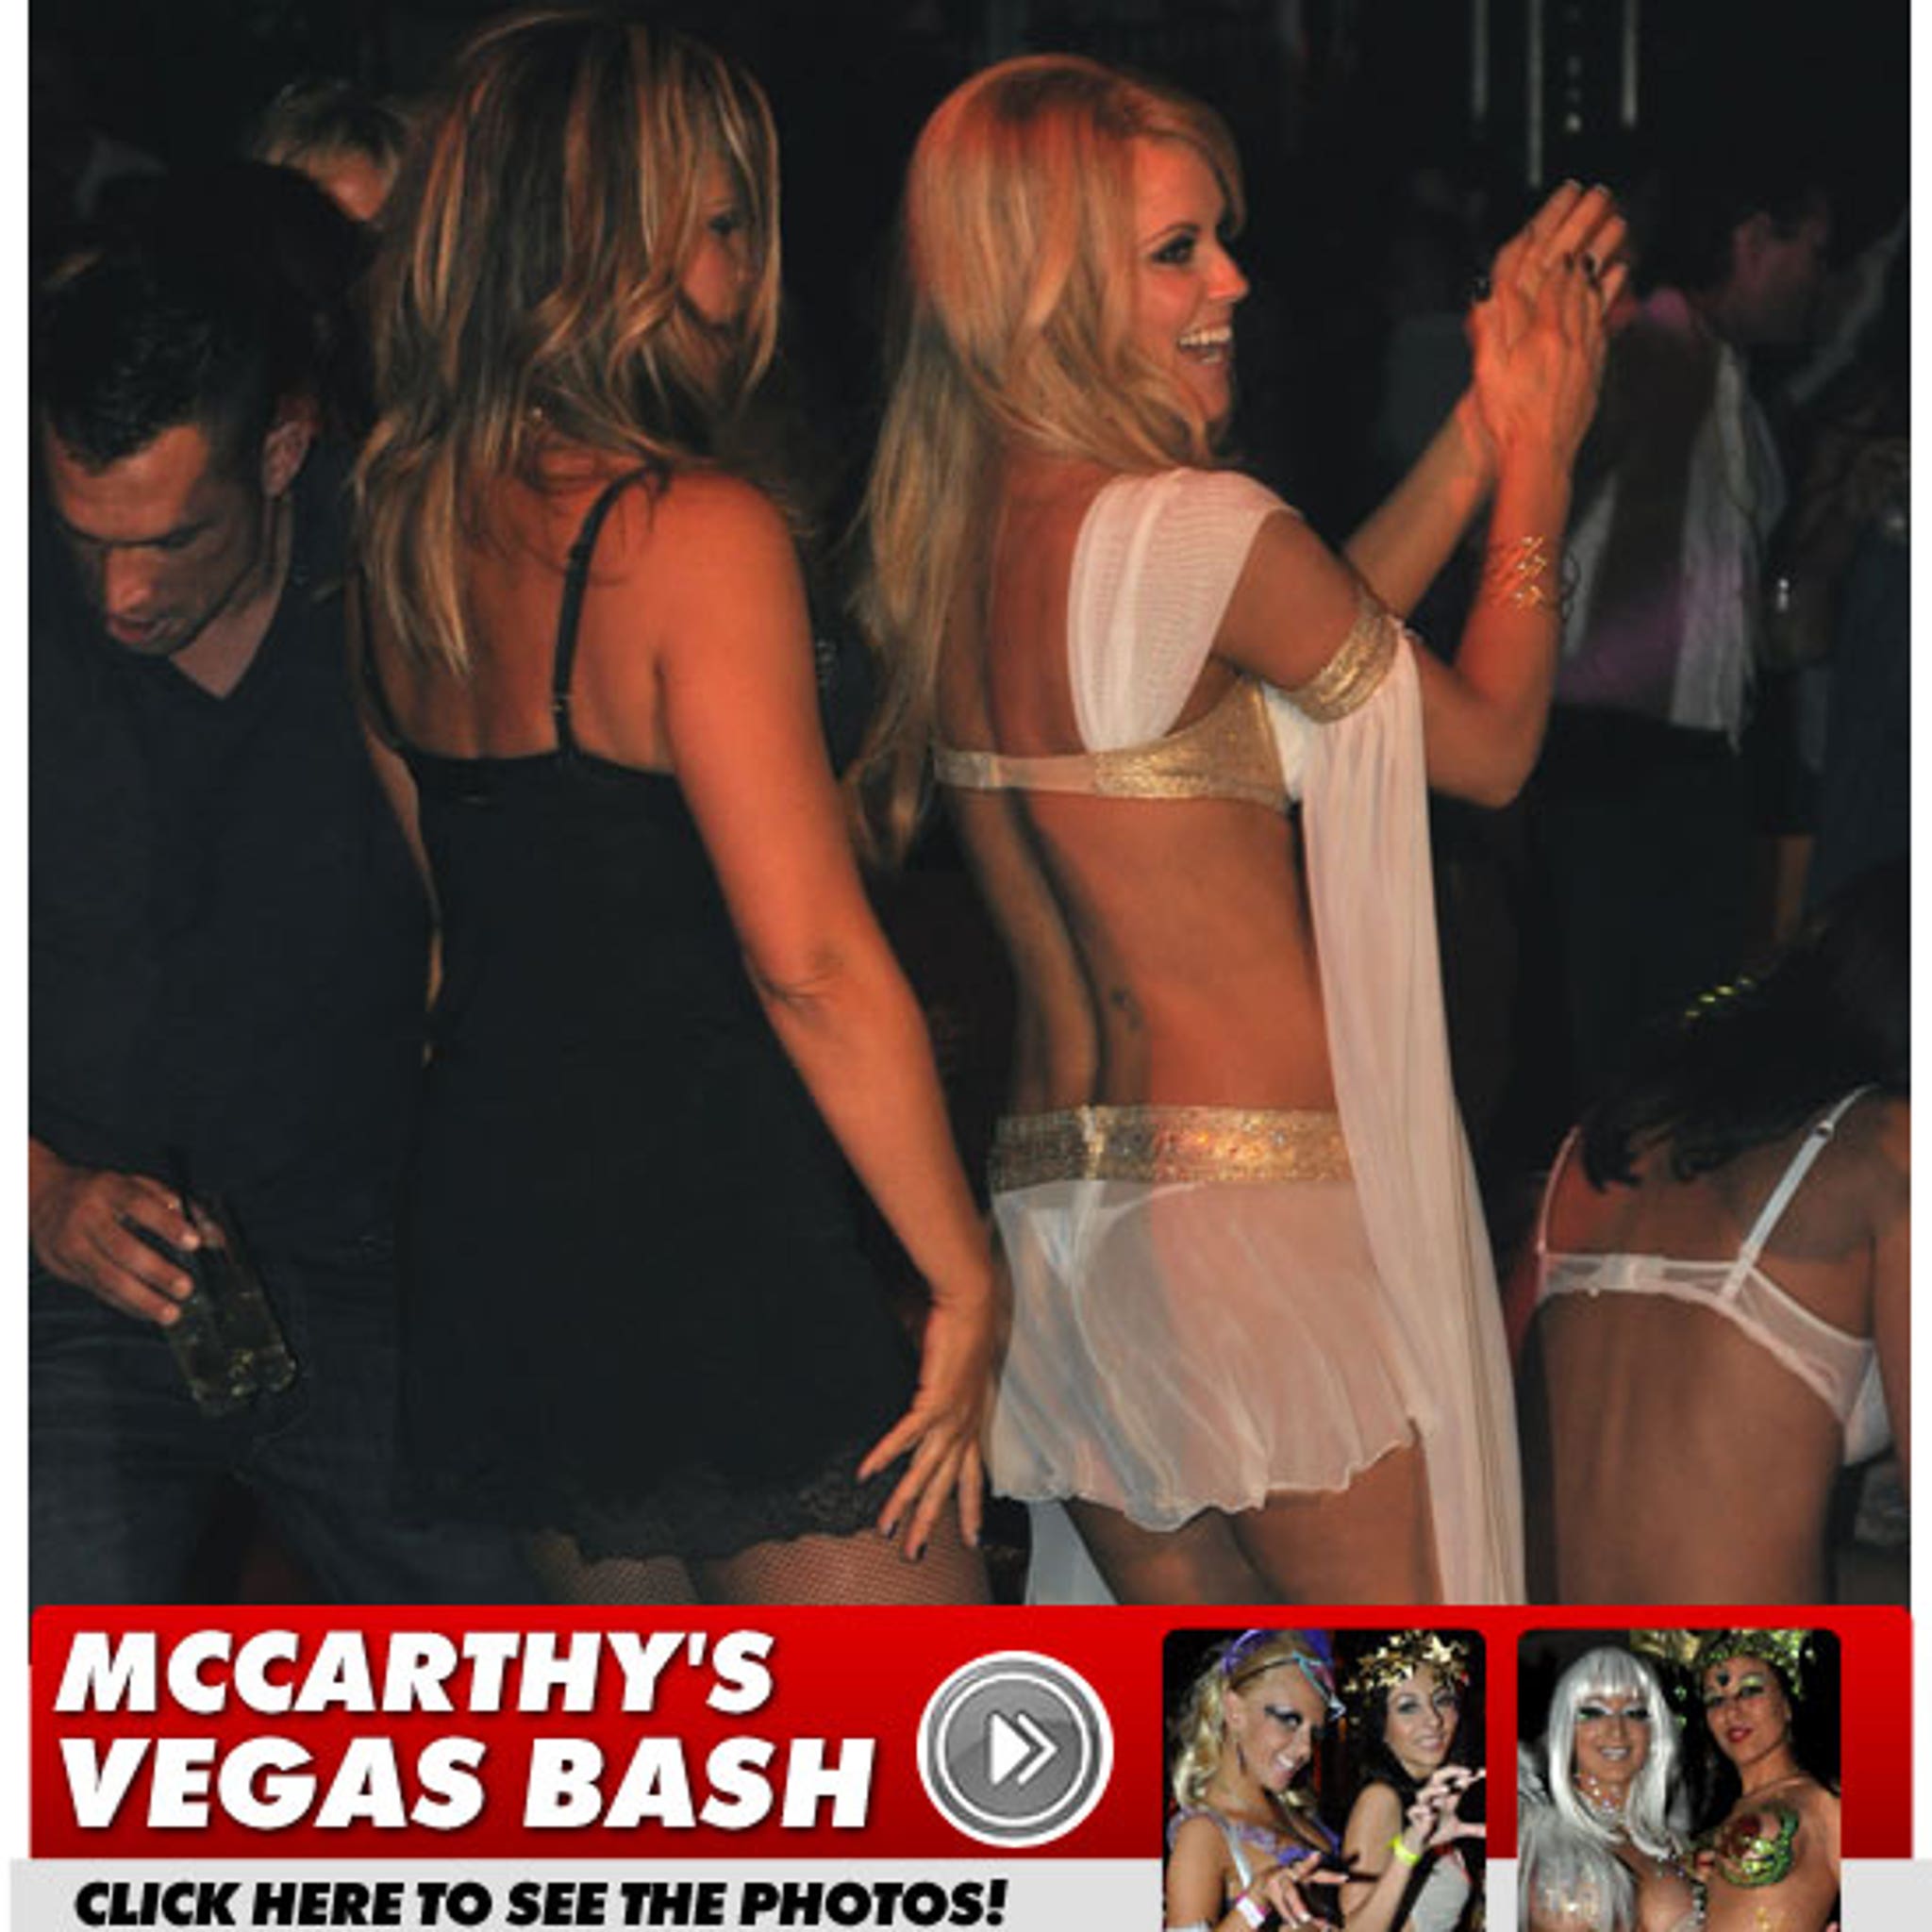 denise dandrea recommends jenny mccarthy sexy photos pic